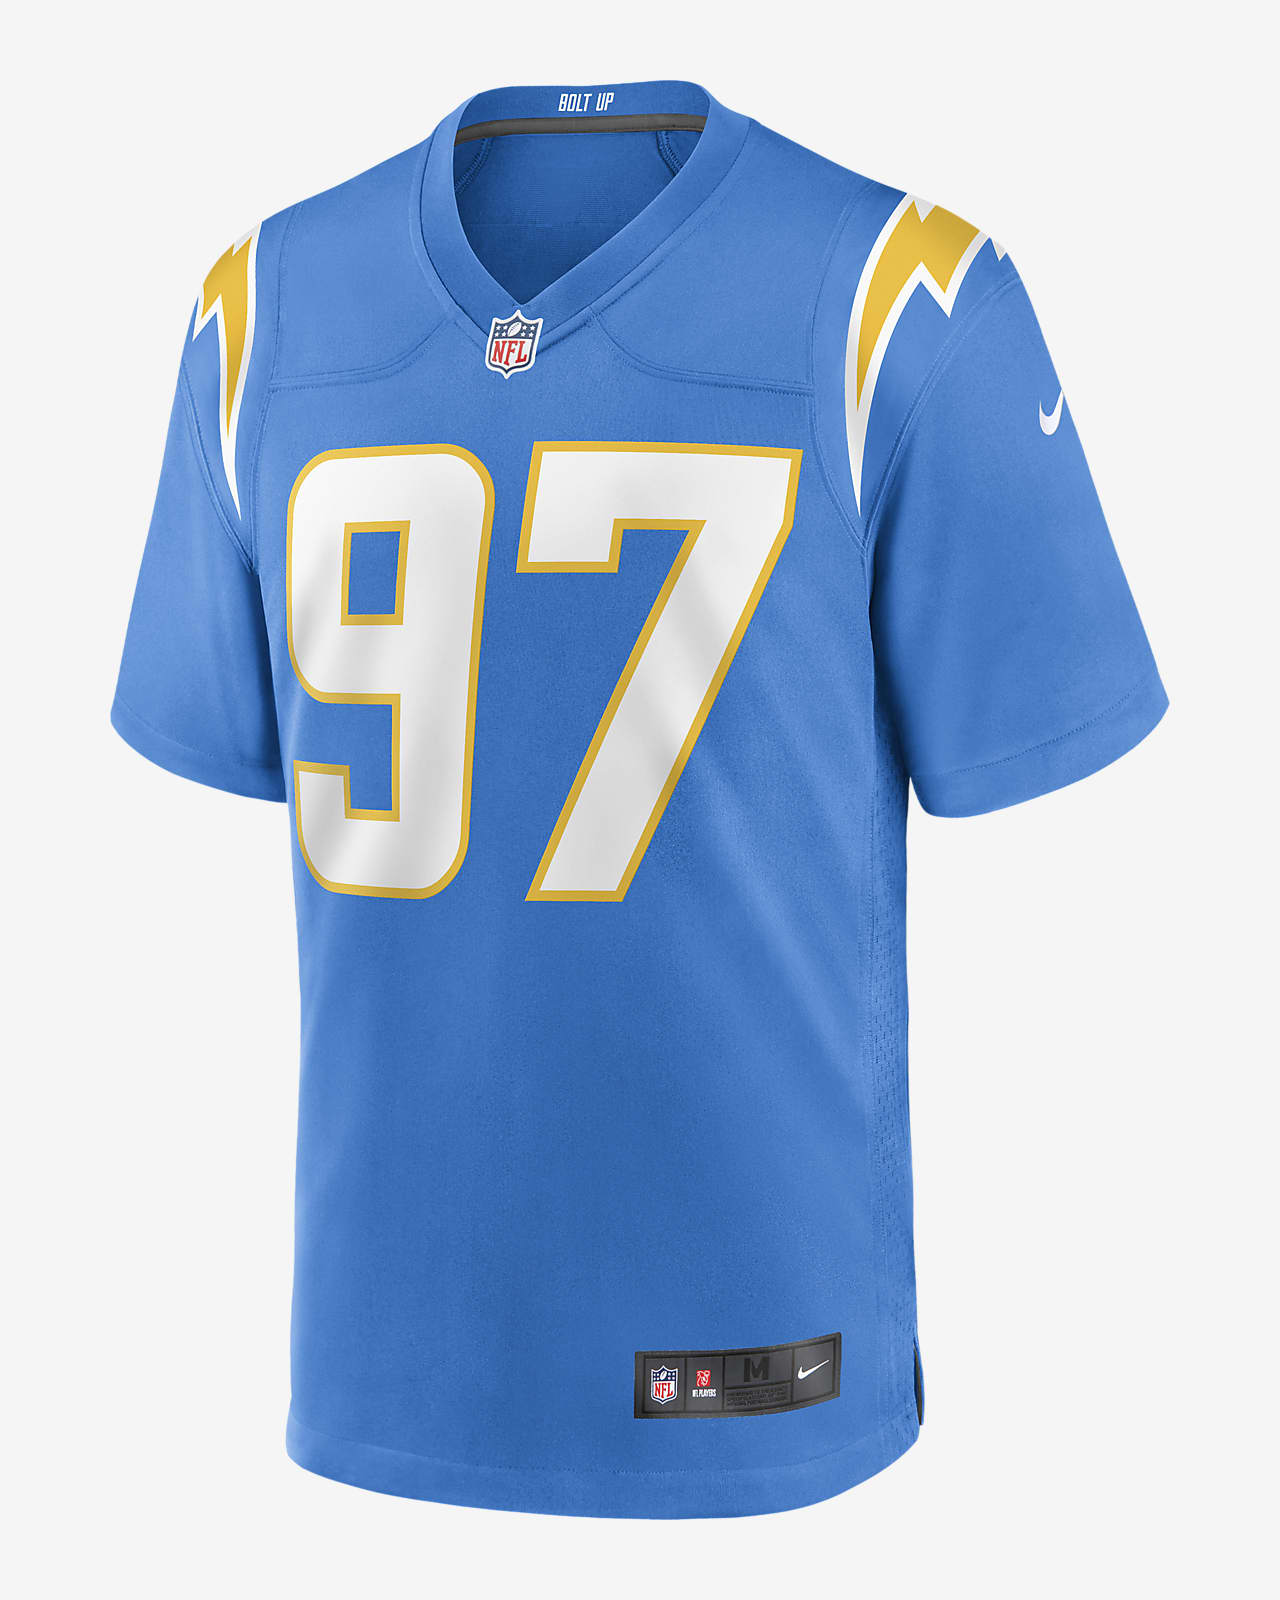 NFL Los Angeles Chargers (Joey Bosa) Men's Game Football Jersey